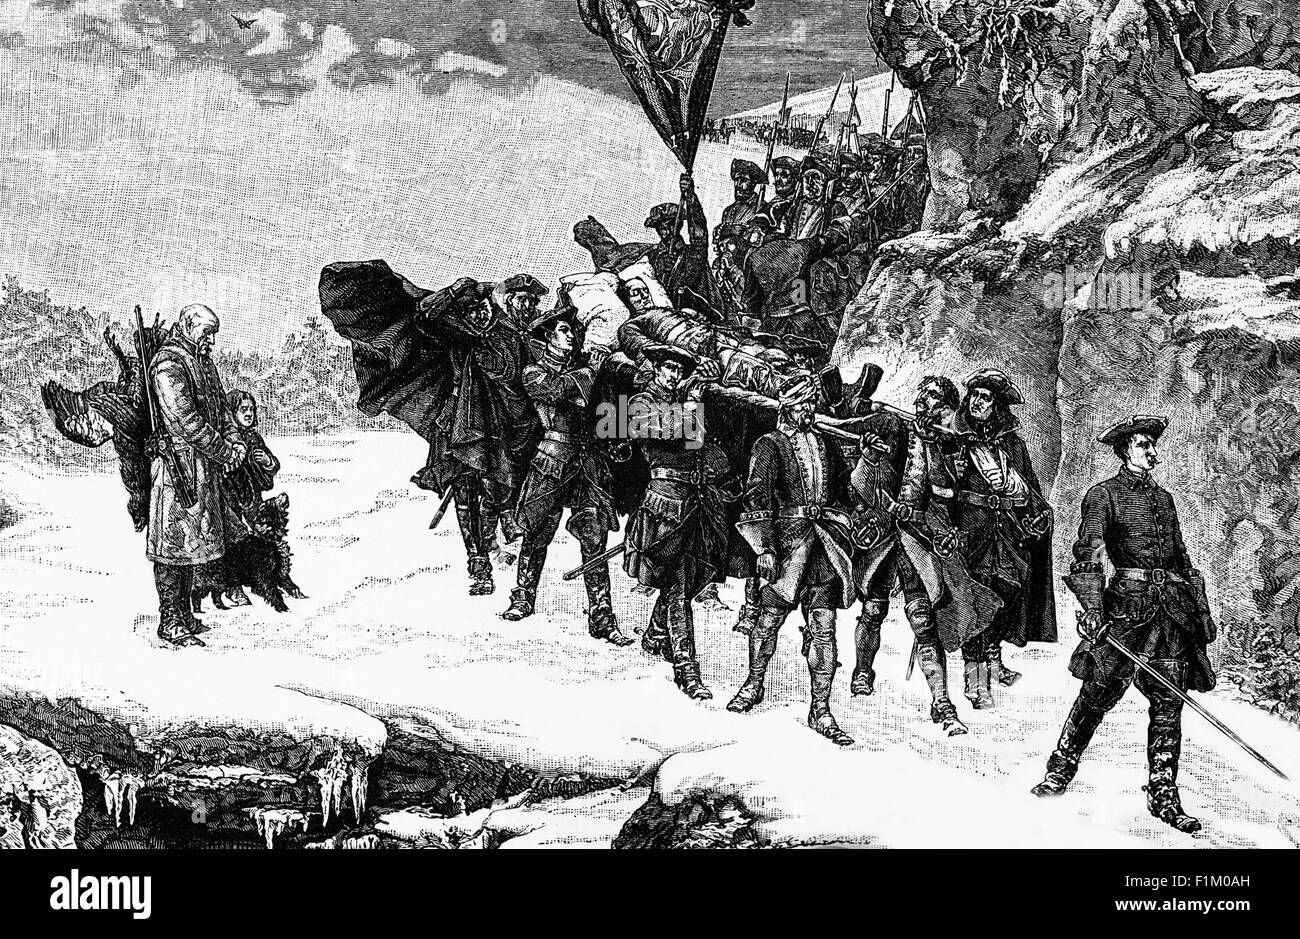 Troops bringing home the body of Charles XII of Sweden after he invaded Norway and laid siege to the fortress of Fredriksten overlooking the town of Fredrikshald in 1718. Charles was shot in the head and killed during the siege, while he was inspecting trenches, possibly assassinated by a fellow countryman. Stock Photo